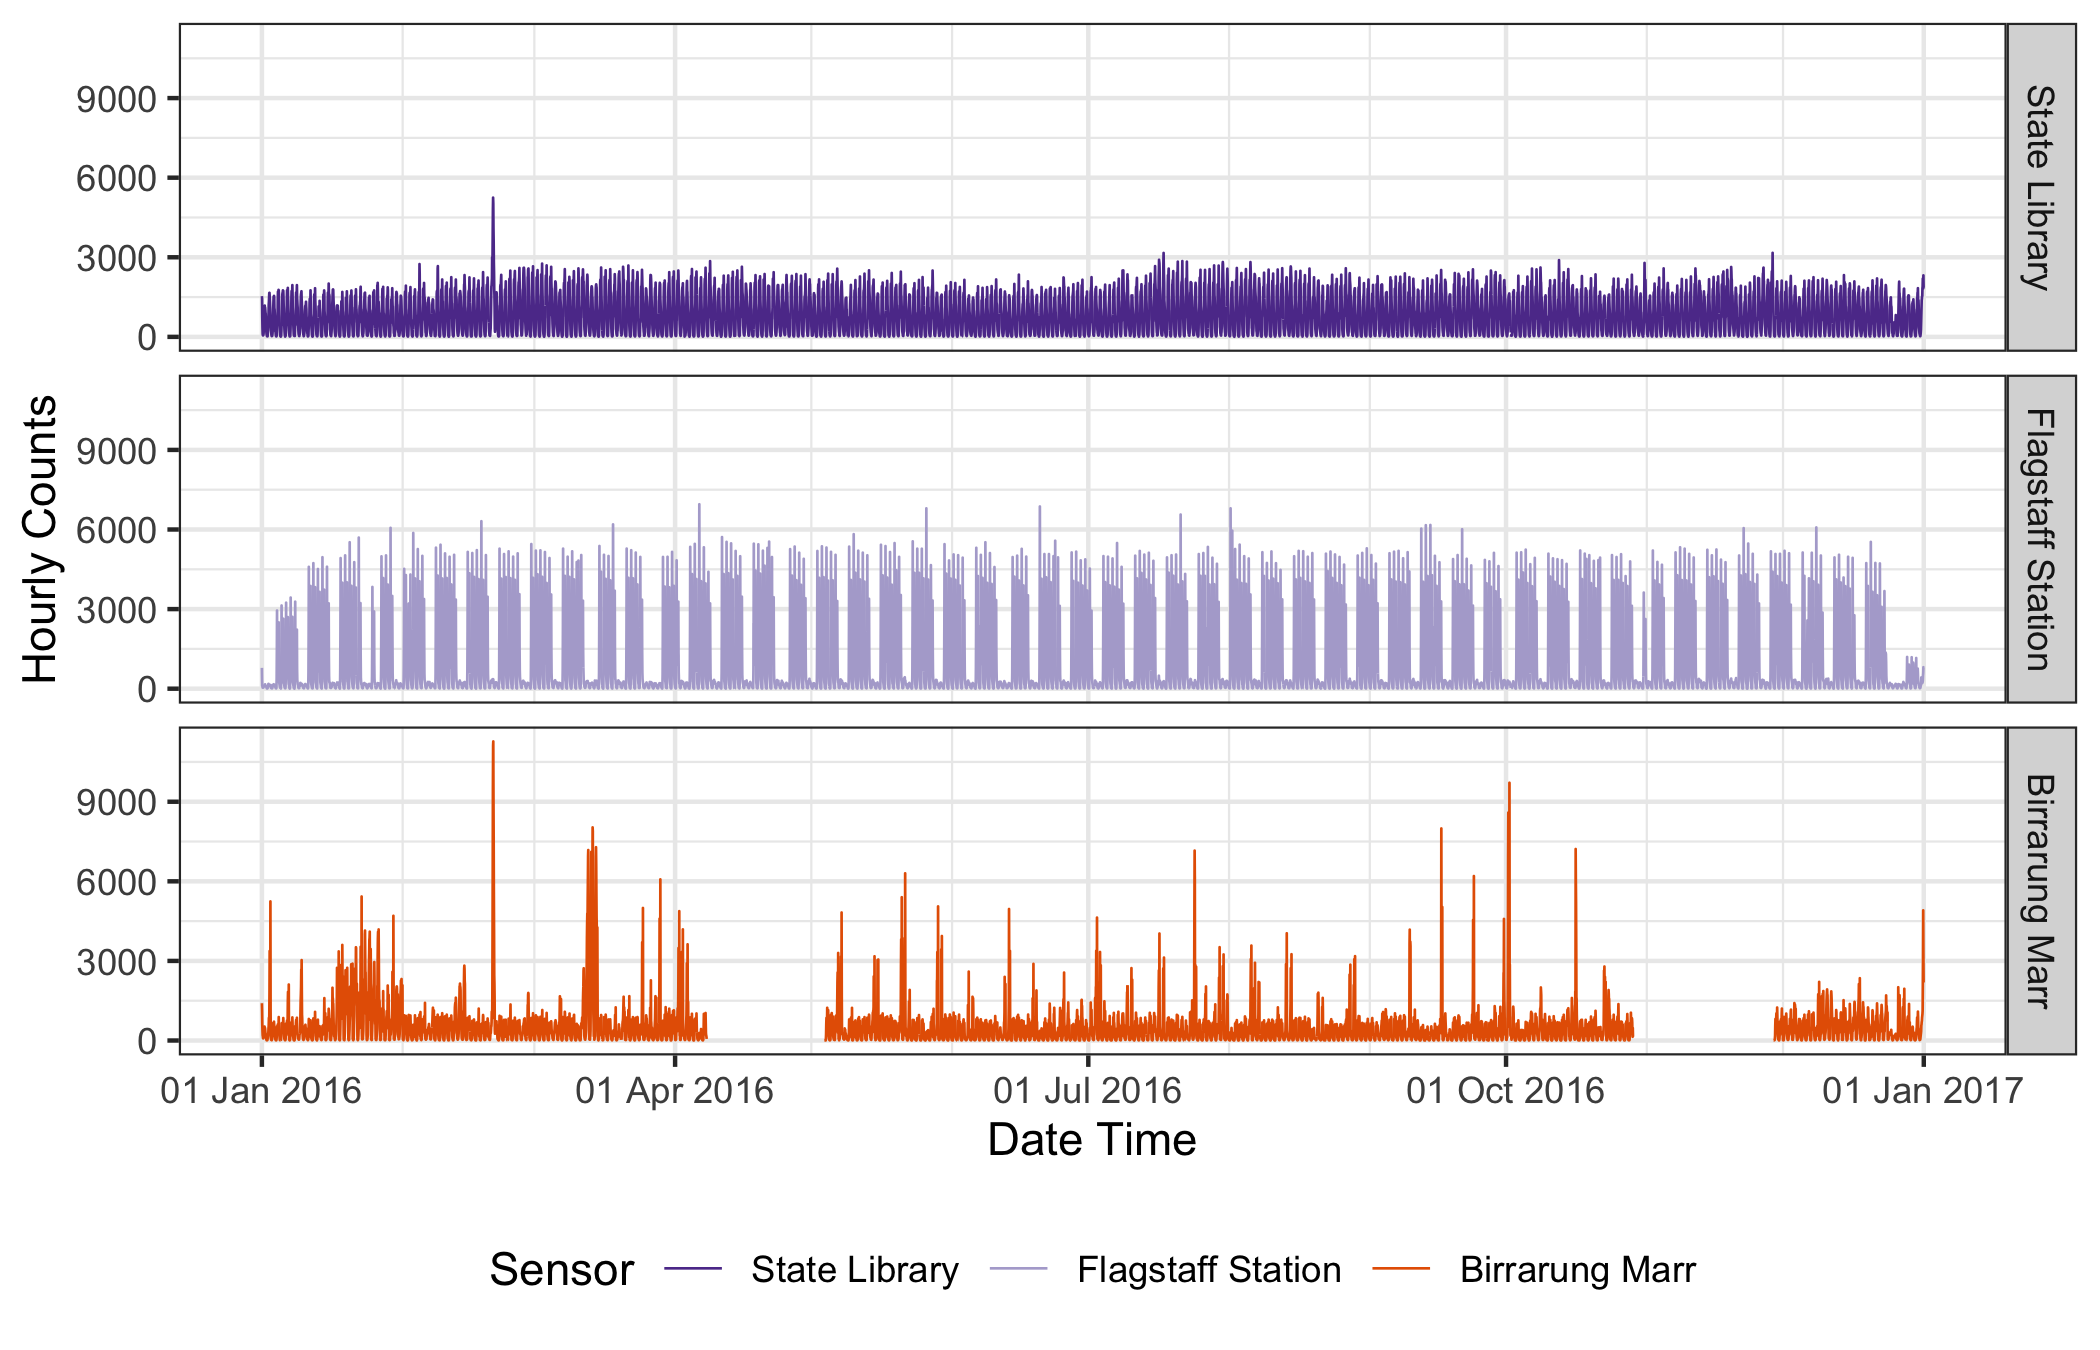 Time series plots showing 2016 pedestrian counts, measured by three different sensors in the city of Melbourne. Small multiples of lines show that the foot traffic varies at one location to another. The spike in counts at the State Library corresponds to the timing of the event “White Night”, where there were many people taking part in activities in the city throughout the night. A relatively persistent pattern repeats from one week to another at Flagstaff Station. Birrarung Marr looks rather noisy and spiky, with several runs of missing records.